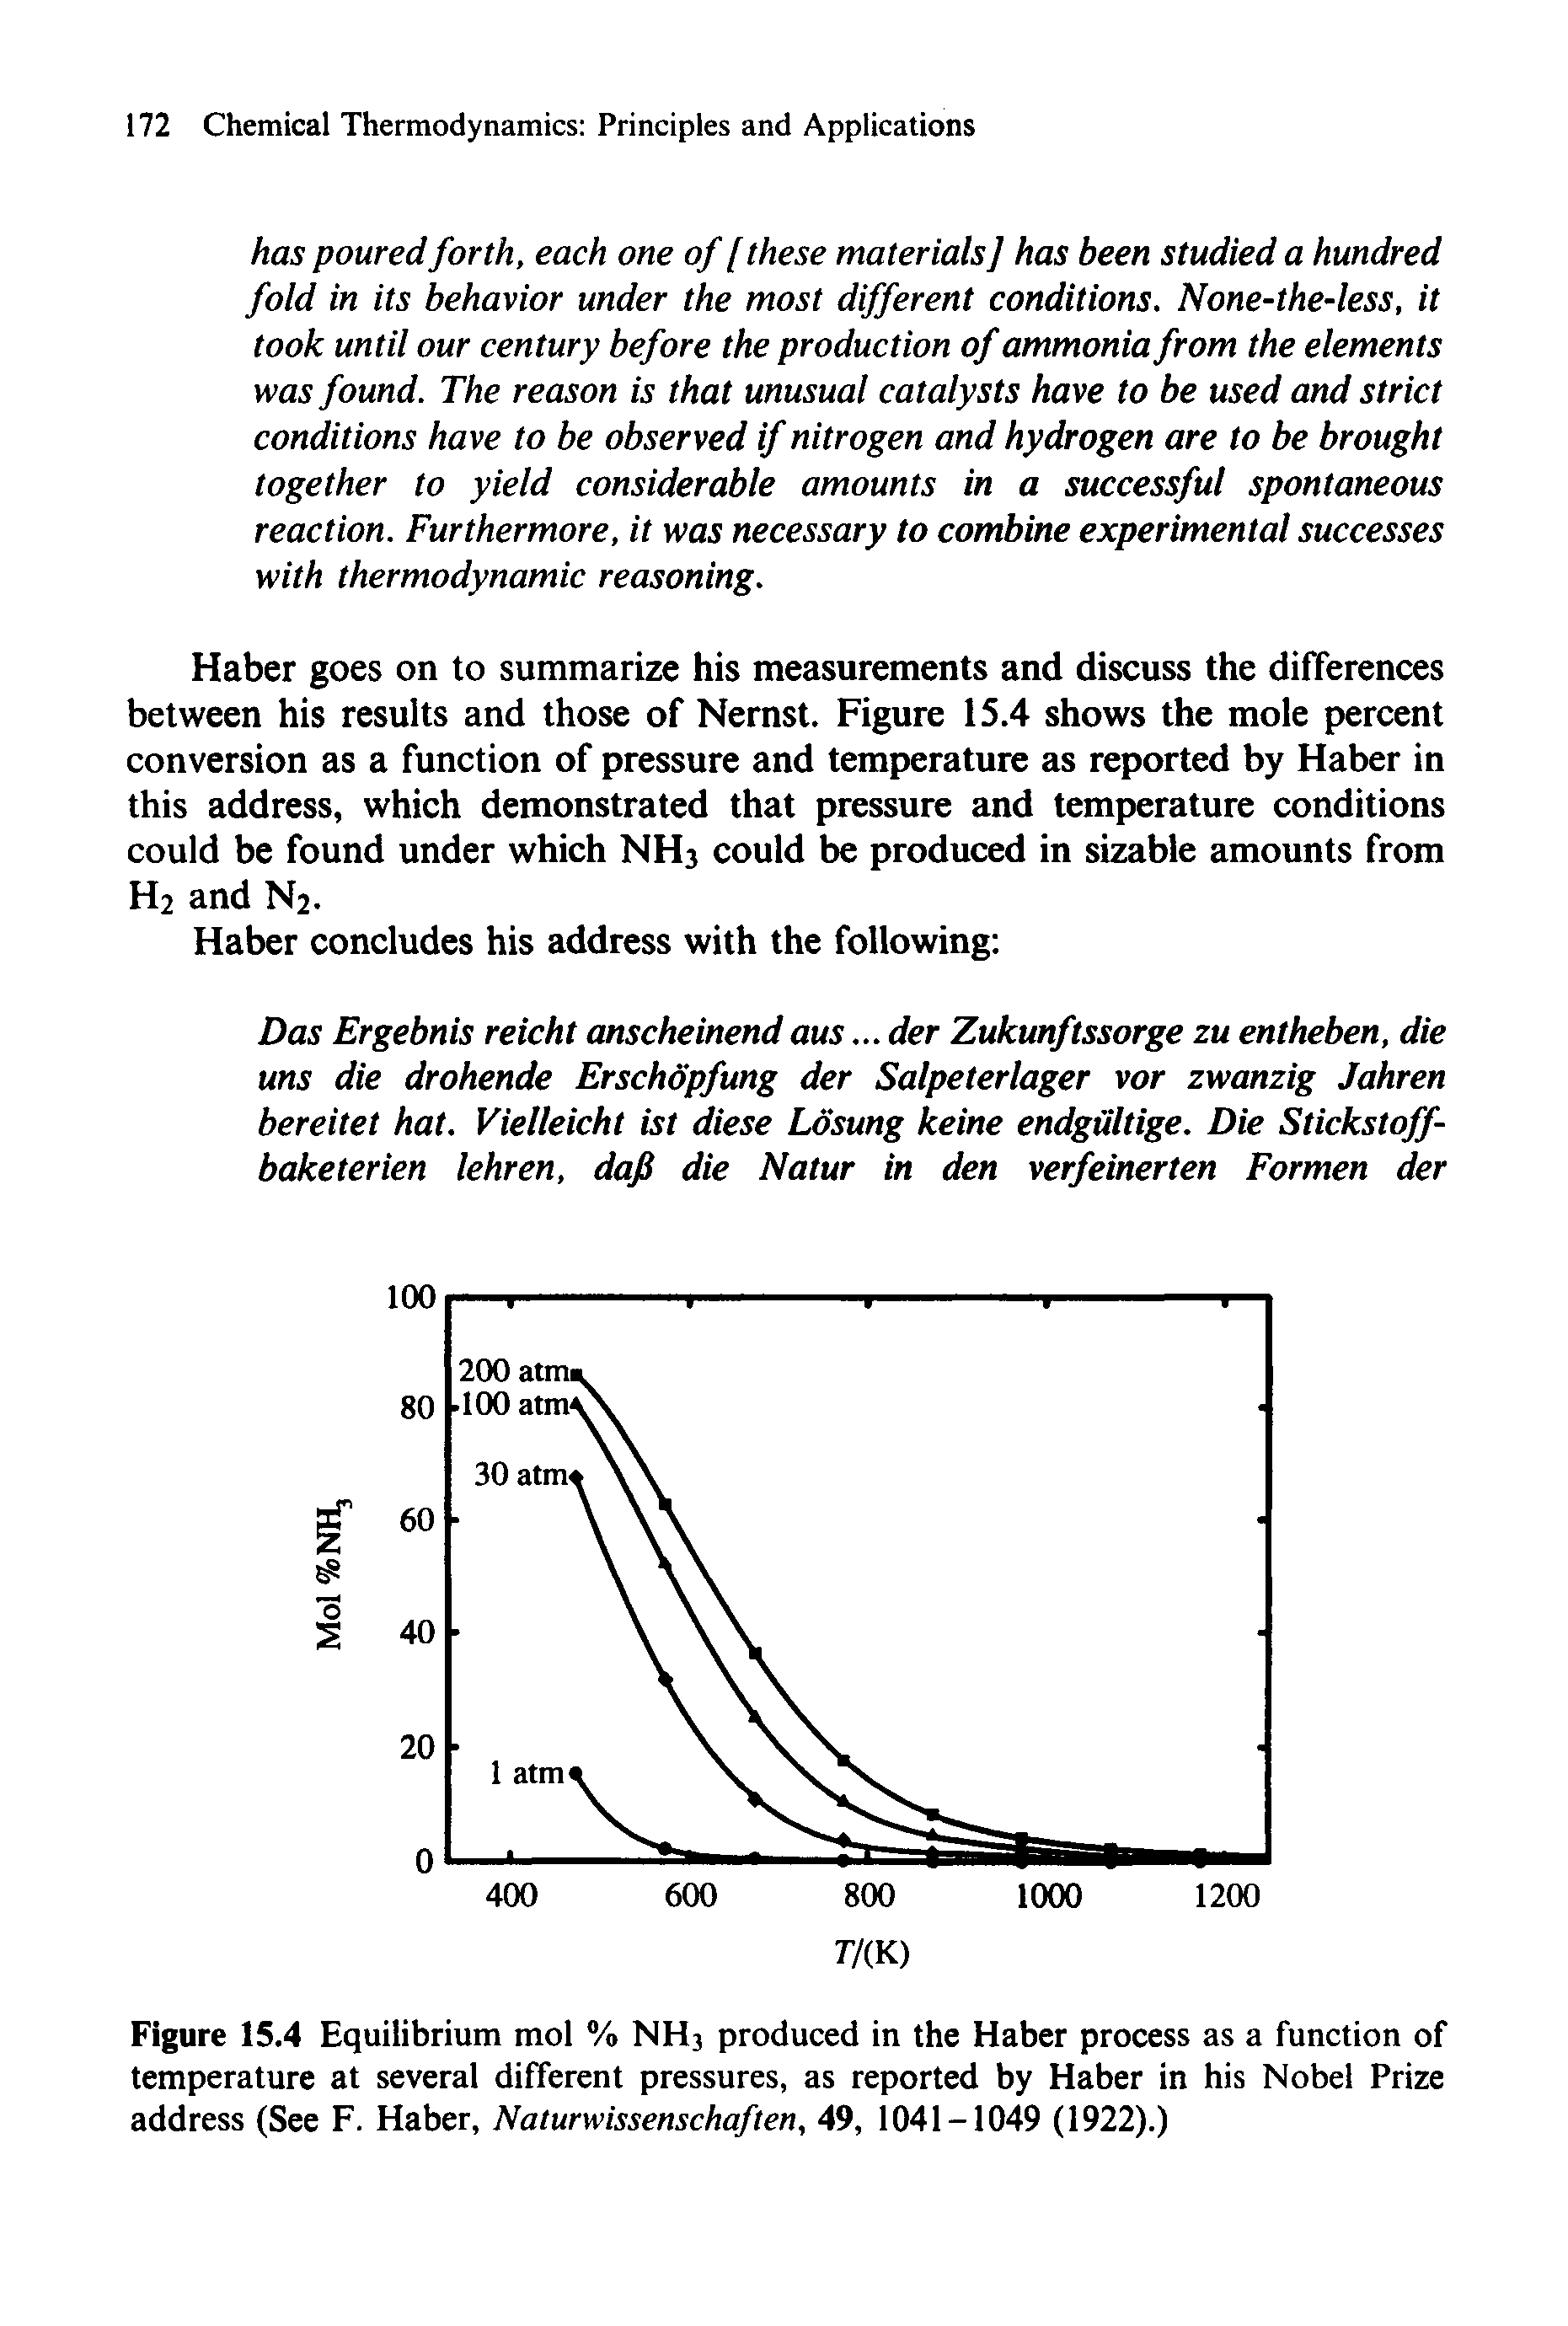 Figure 15.4 Equilibrium mol % NH3 produced in the Haber process as a function of temperature at several different pressures, as reported by Haber in his Nobel Prize address (See F. Haber, Naturwissenschaften, 49, 1041-1049 (1922).)...